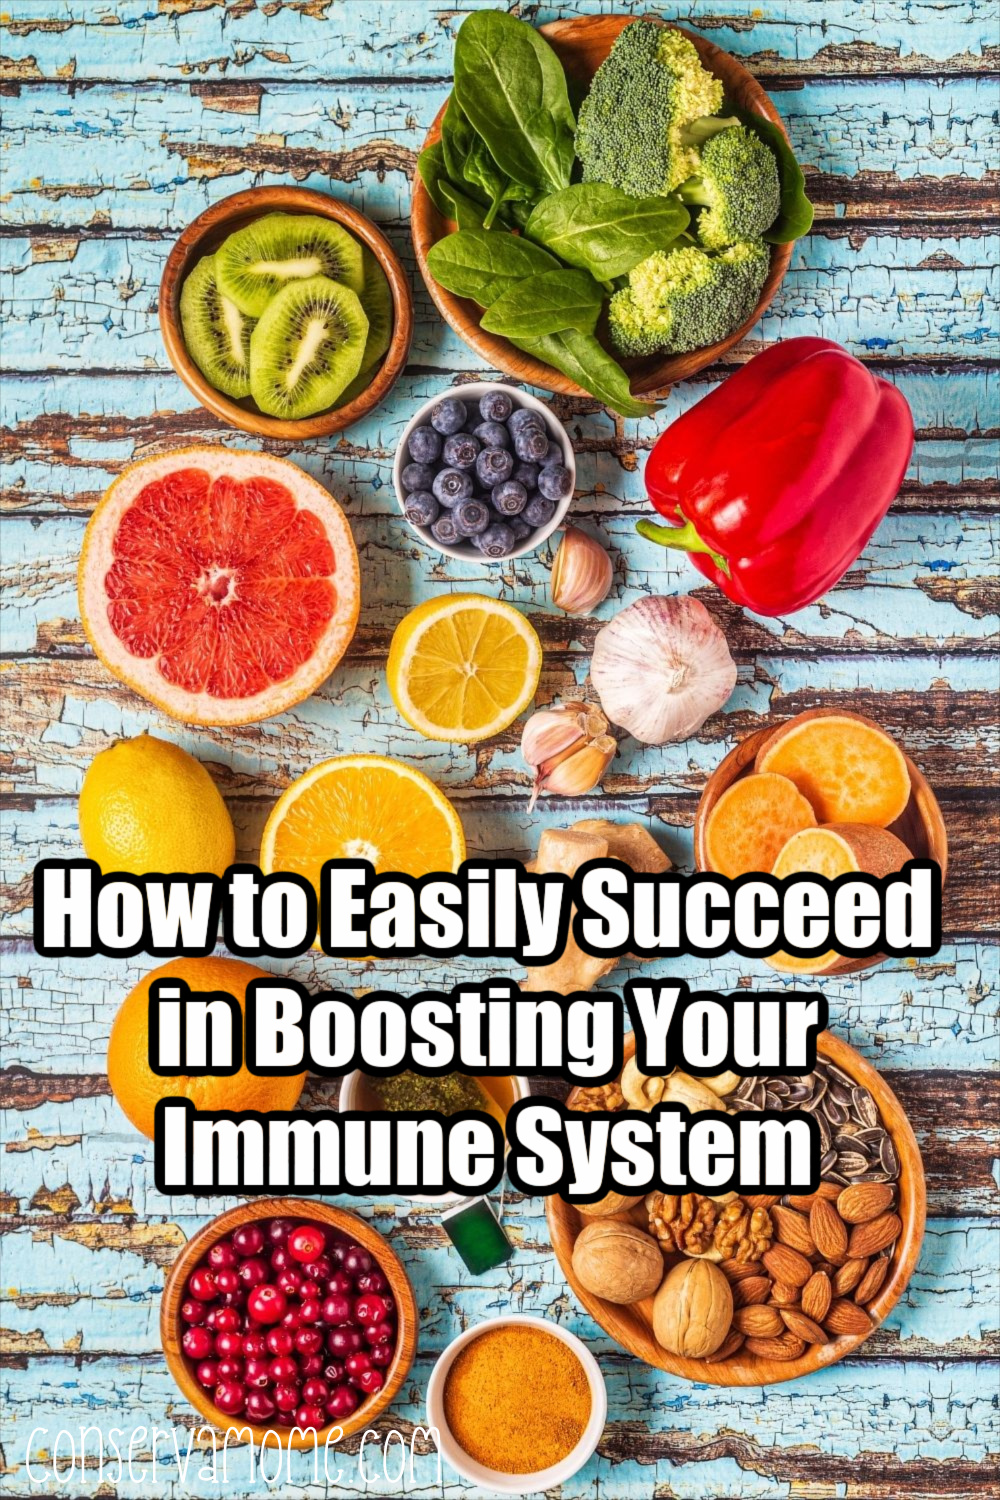 How to Easily Succeed in Boosting Your Immune System